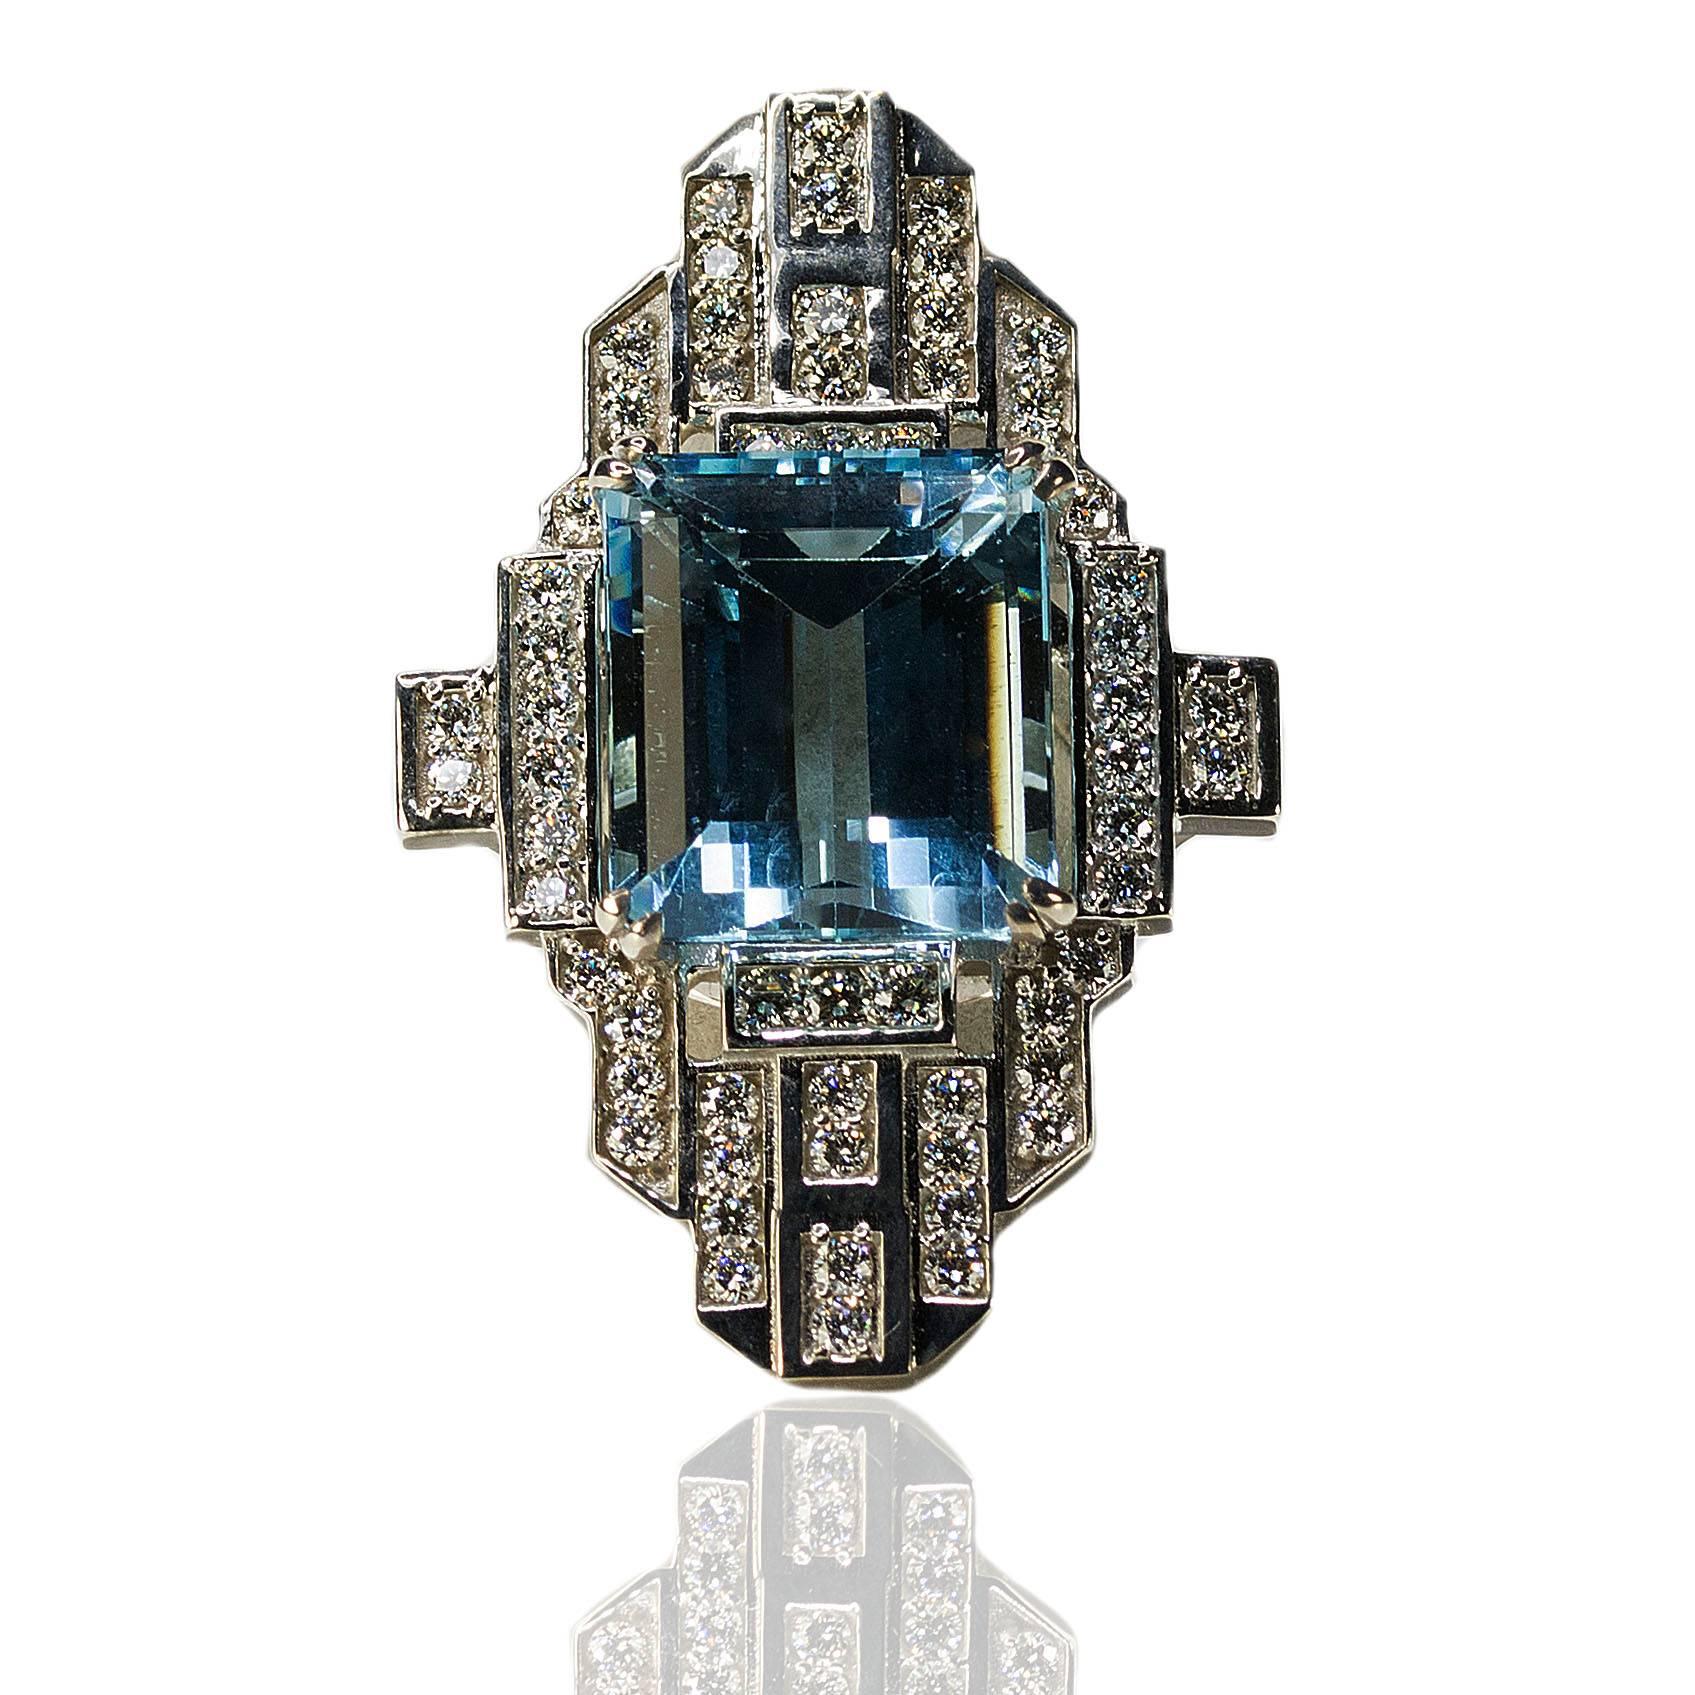 GIA certified 21.25 carat Aquamarine set in Art Deco style Platinum ring with 62 collection color/clarity round brilliant diamonds weighing 2.17 carats, 29.49g